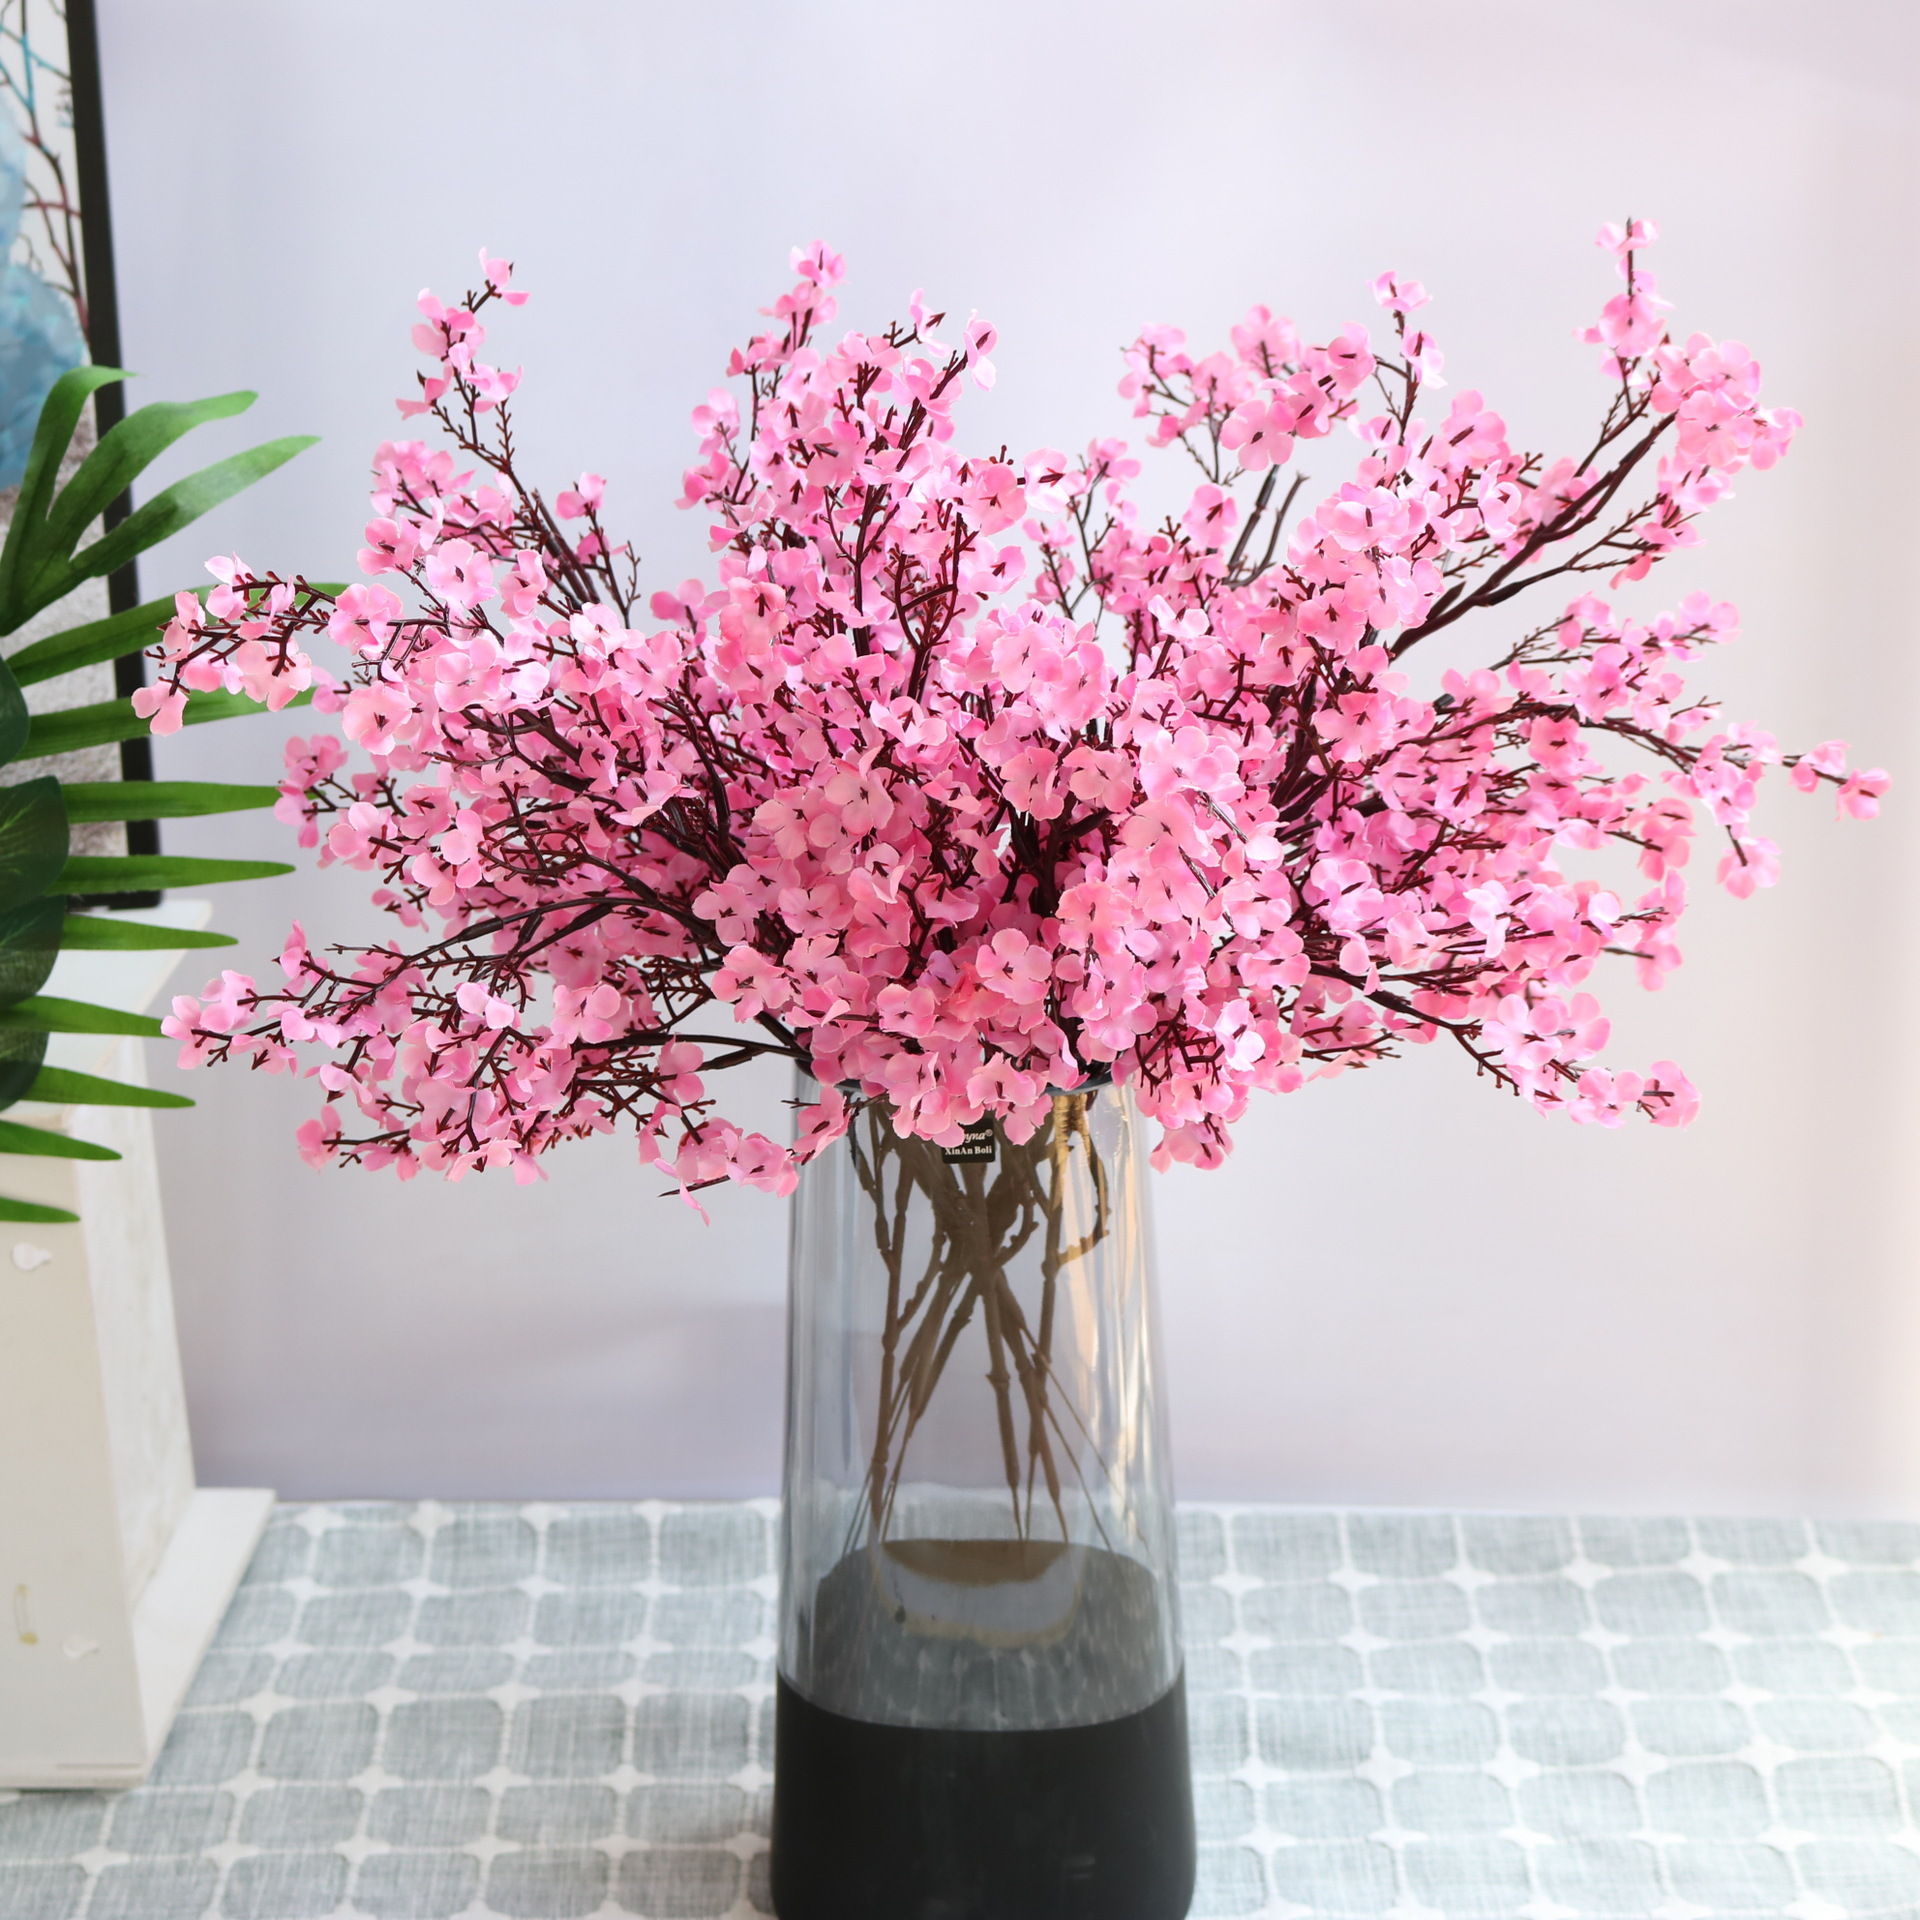 1 Bunch of gypsophila Artificial Flowers / High Quality Plants Bouquet/Real Touch Decorative Fake Flower Holding Bouquet / For Office, Hotel, Home Wedding Christmas Festival Party DIY Indoor Home Decoration